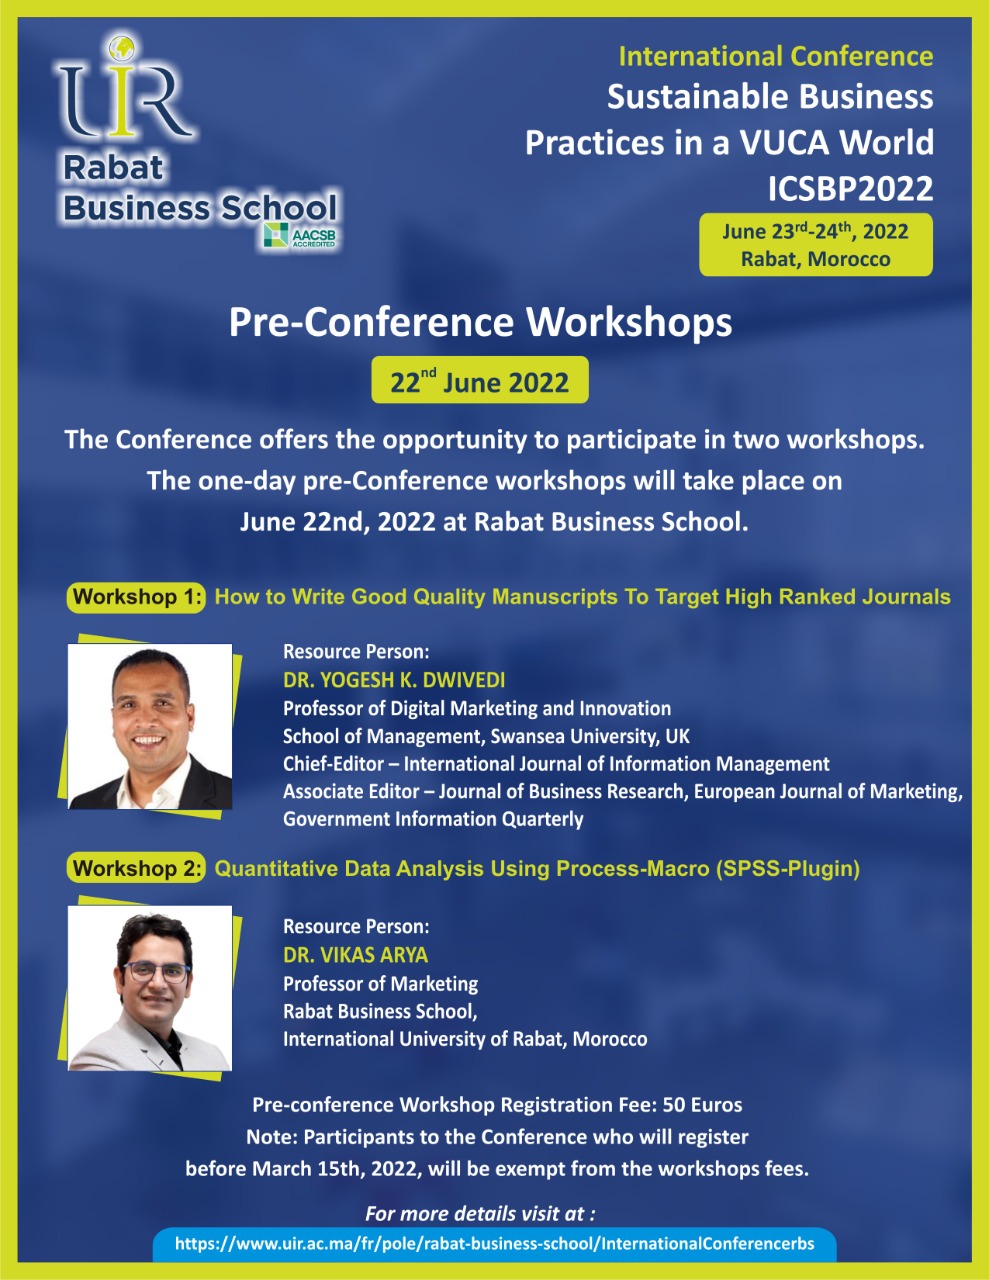 Dr. Vikas Arya will be taking a Pre-conference Workshop on Quantitative Data Analysis Using Process-Macro (SPSS-Plugin) at Rabat Business School, Morocco on 22nd June 2022.